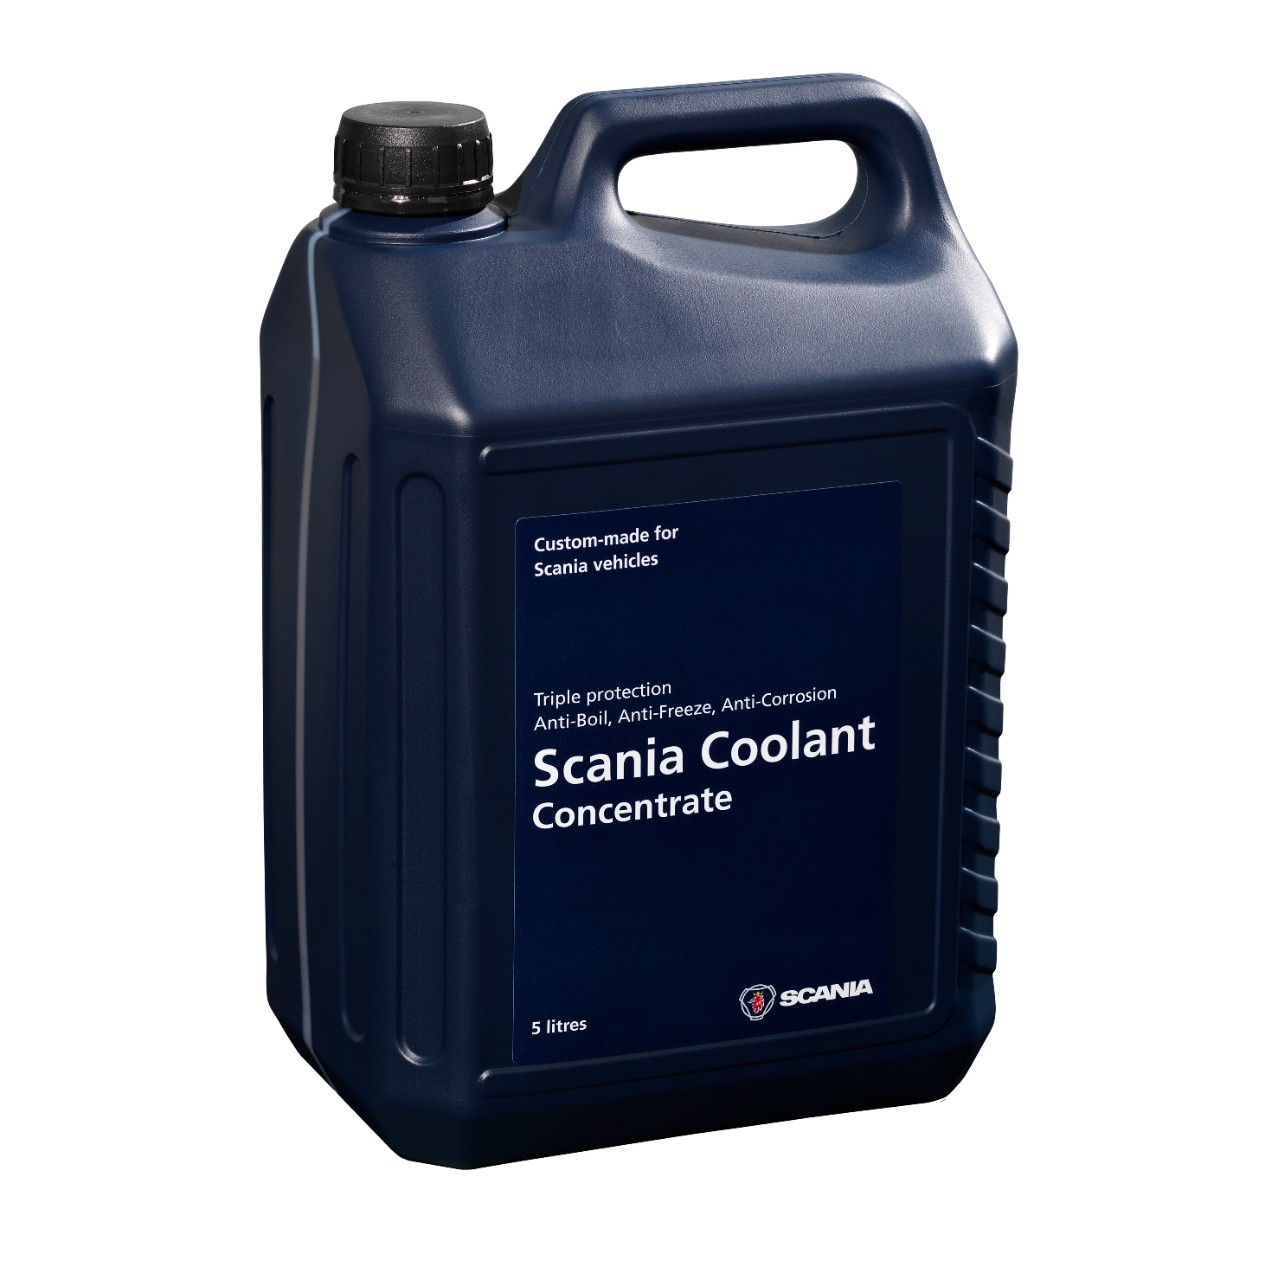 Scania Coolant, Concentrate 5 literPart no. 1894323Photo: Tedd Soost 2012